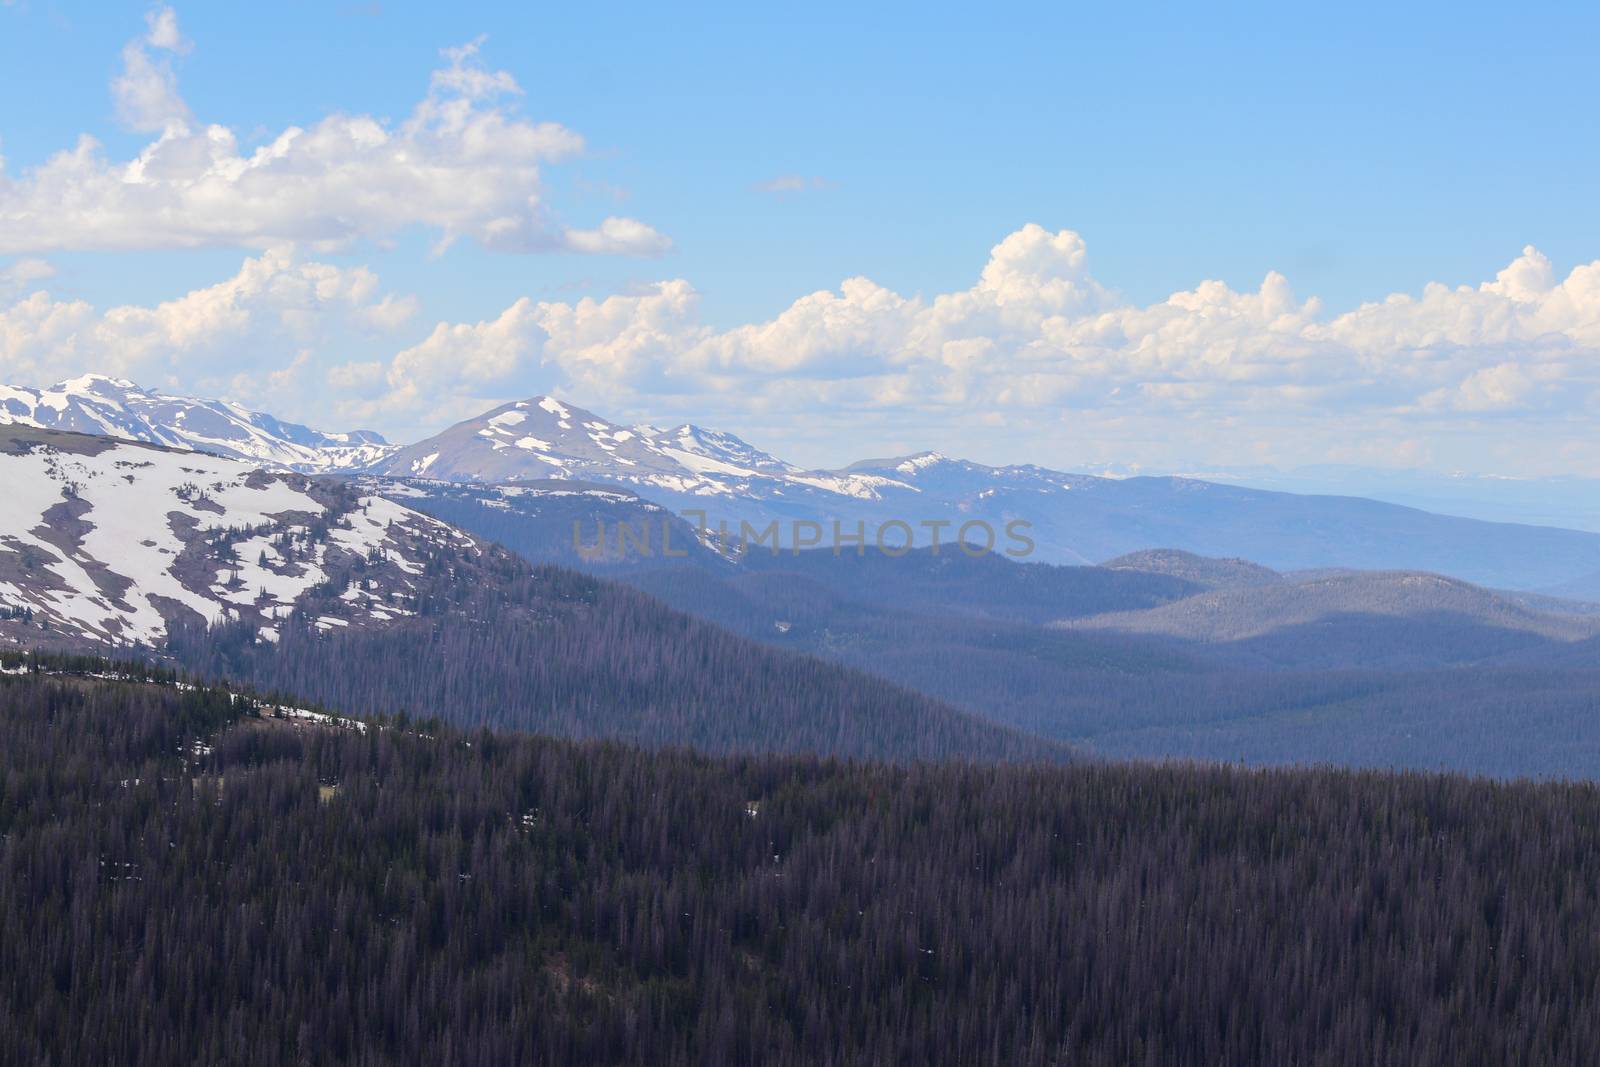 The Colorado mountain snowy covered peaks summer 2019 by gena_wells